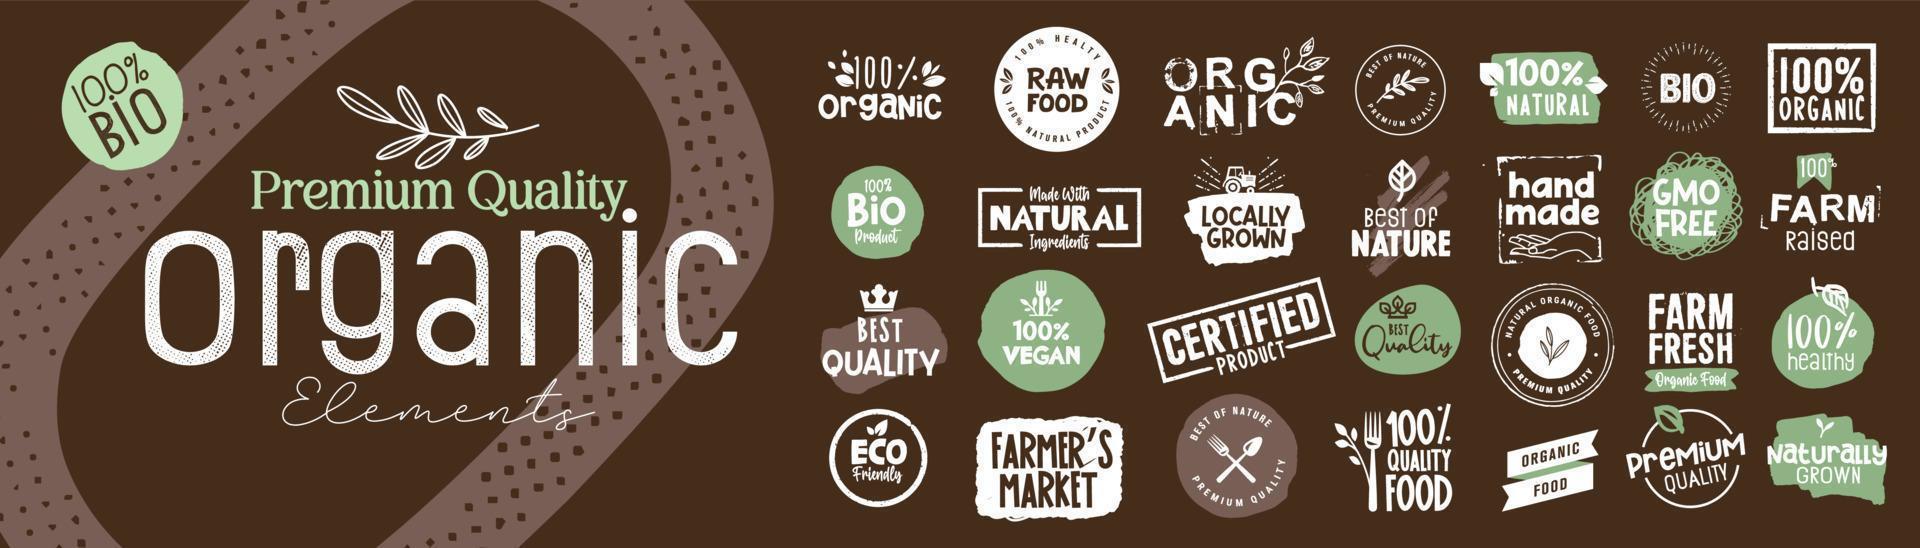 Organic food, farm fresh and natural product signs collection for food market, ecommerce, restaurant, healthy life. Vector illustration concepts for web design, packaging design, marketing.